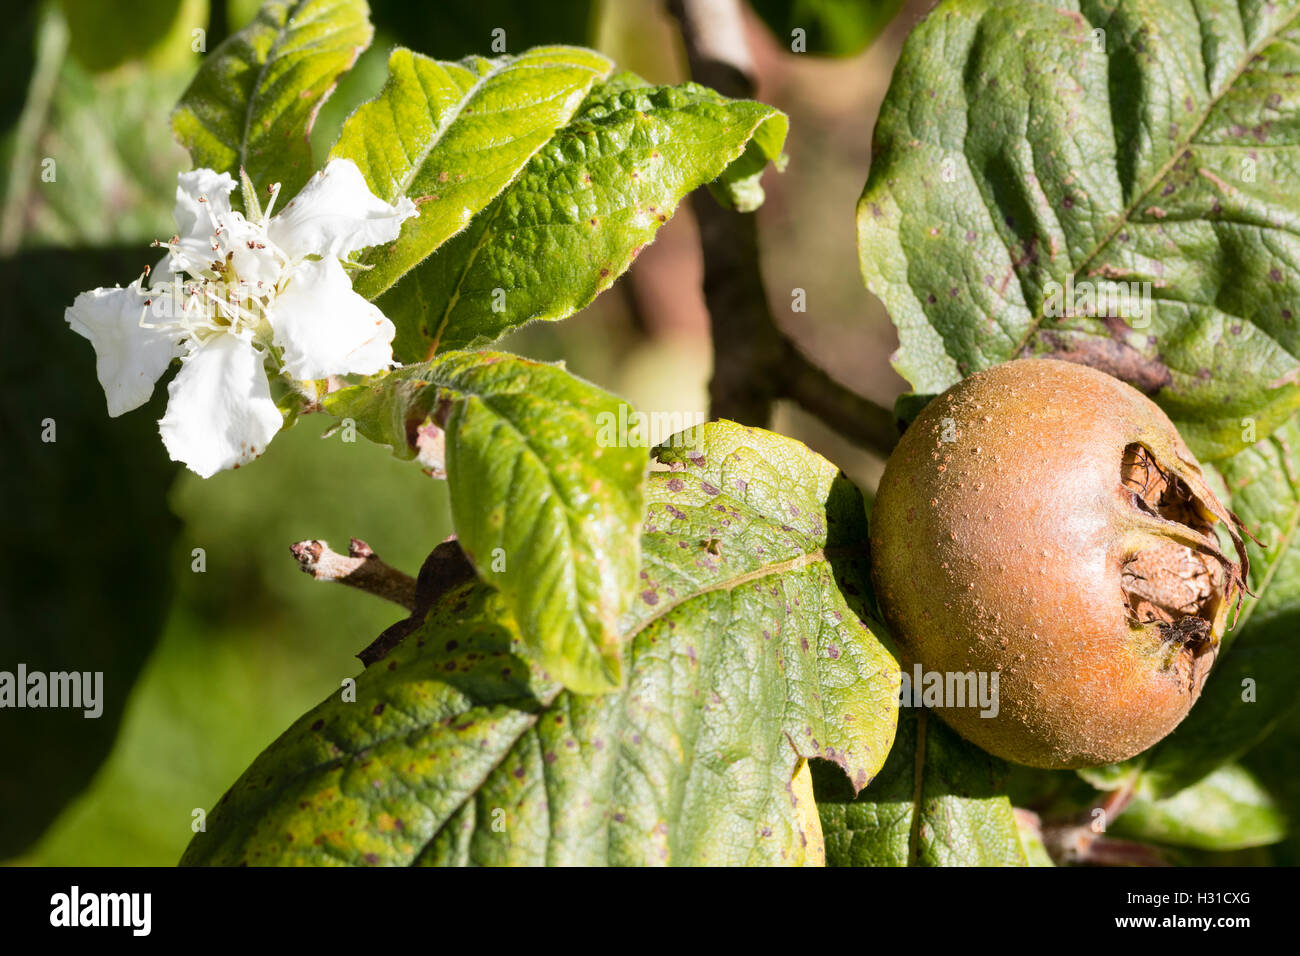 Autumn fruit and single out of season flower of the Medlar, Mespilus germanica Stock Photo